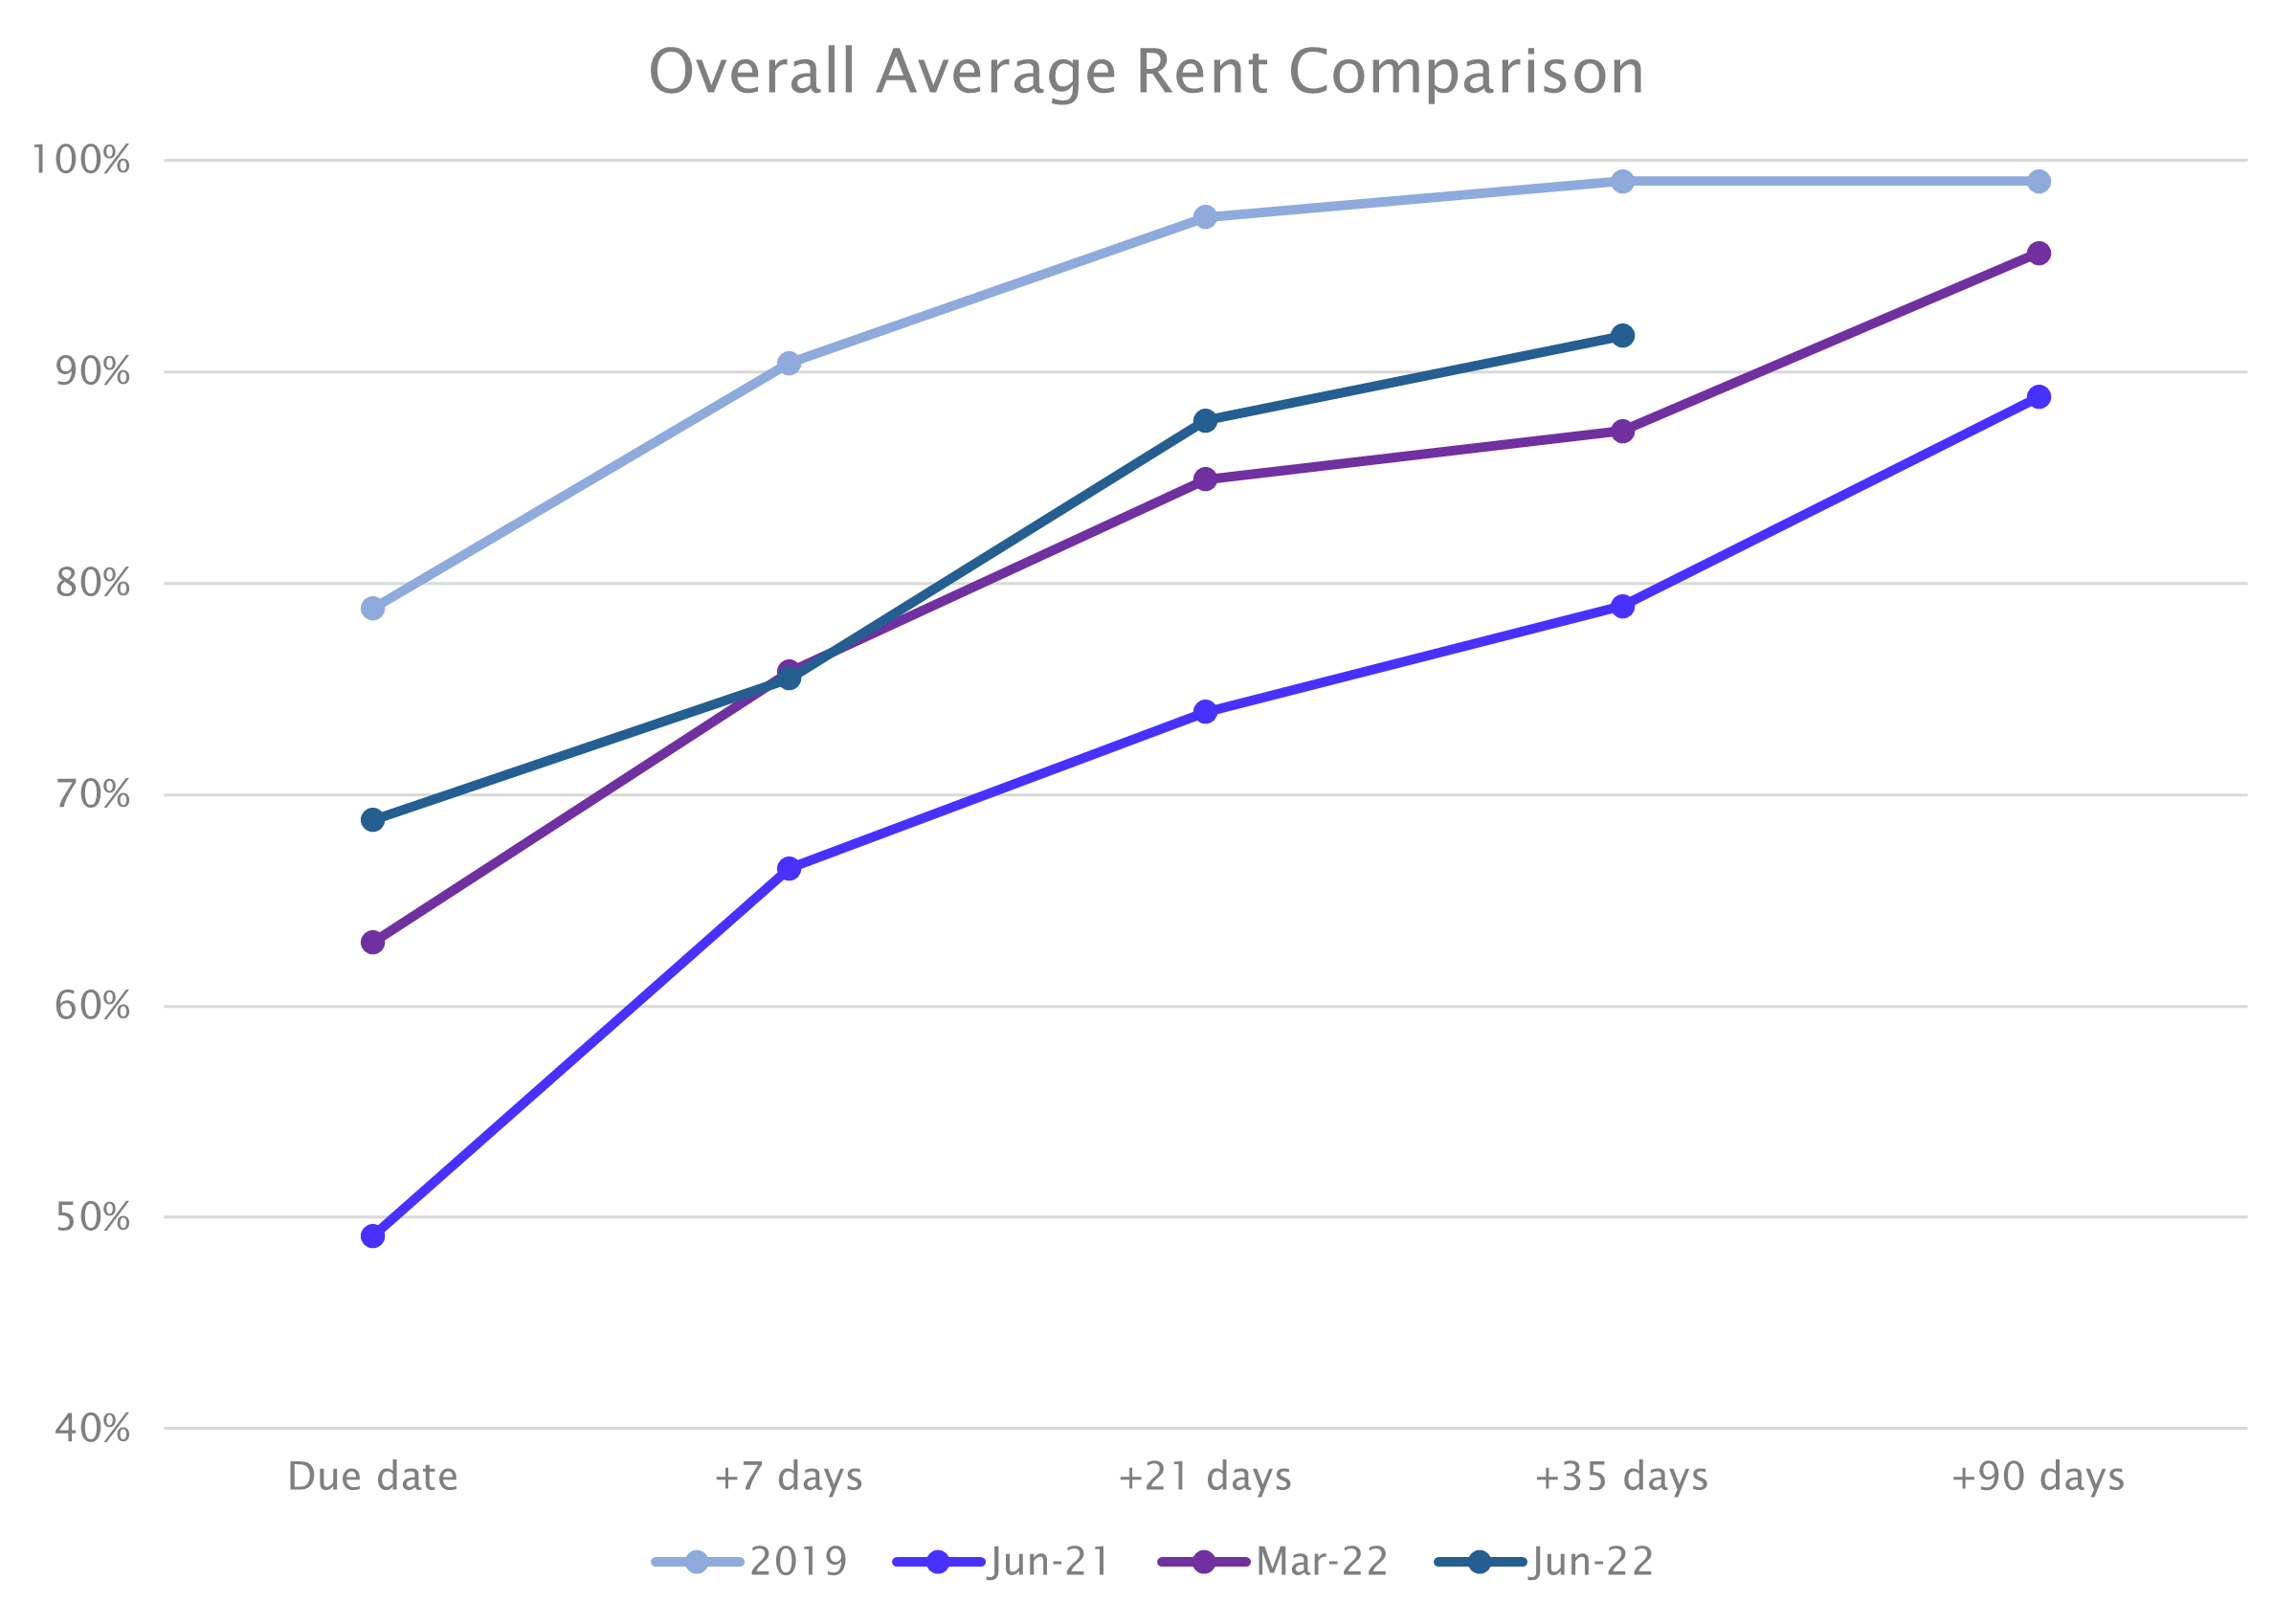 Graph of rents collected